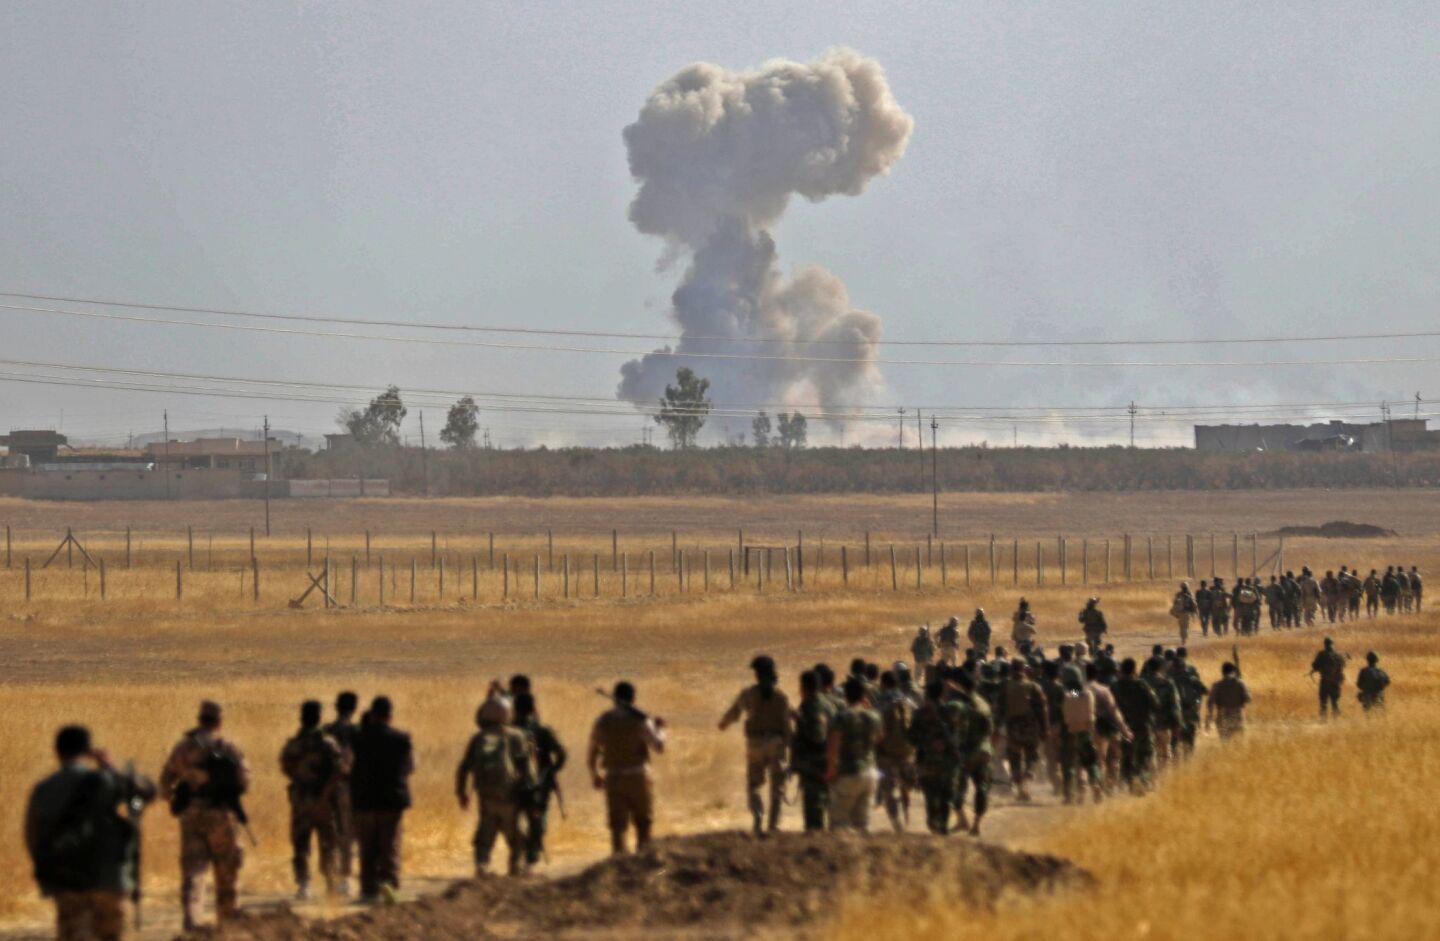 Smoke billows from an area near the Iraqi town of Nawaran, northeast of Mosul, as Iraqi Kurdish Peshmerga fighters march down a dirt road during the ongoing operation to retake the city from Islamic State.